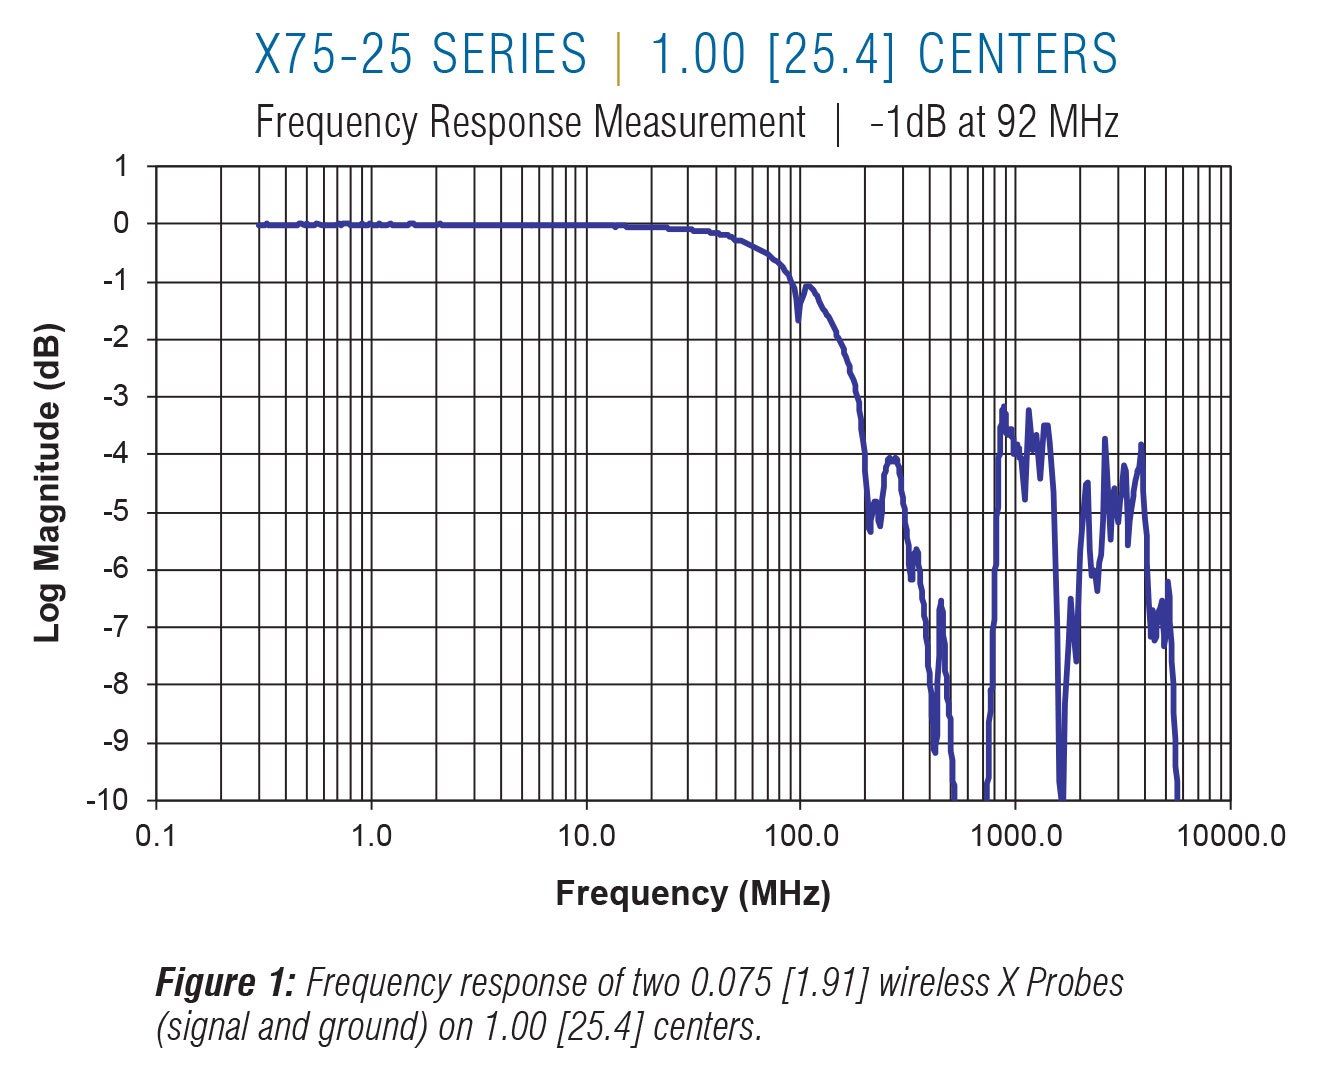 X75-25 Frequency on 1.00 centers